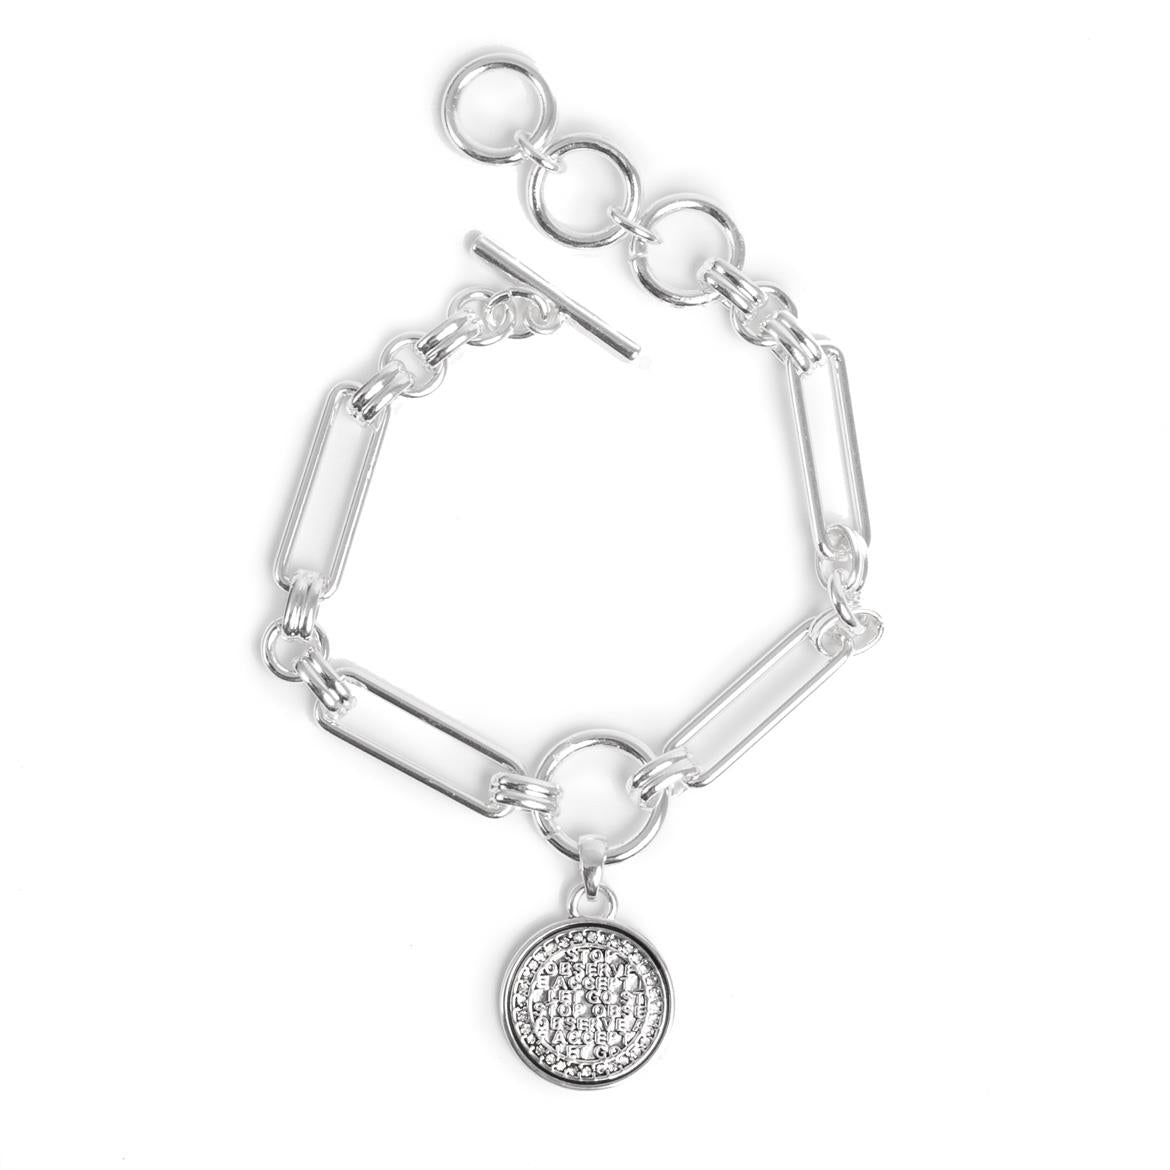 Bracelet Coins Of Relief Silver